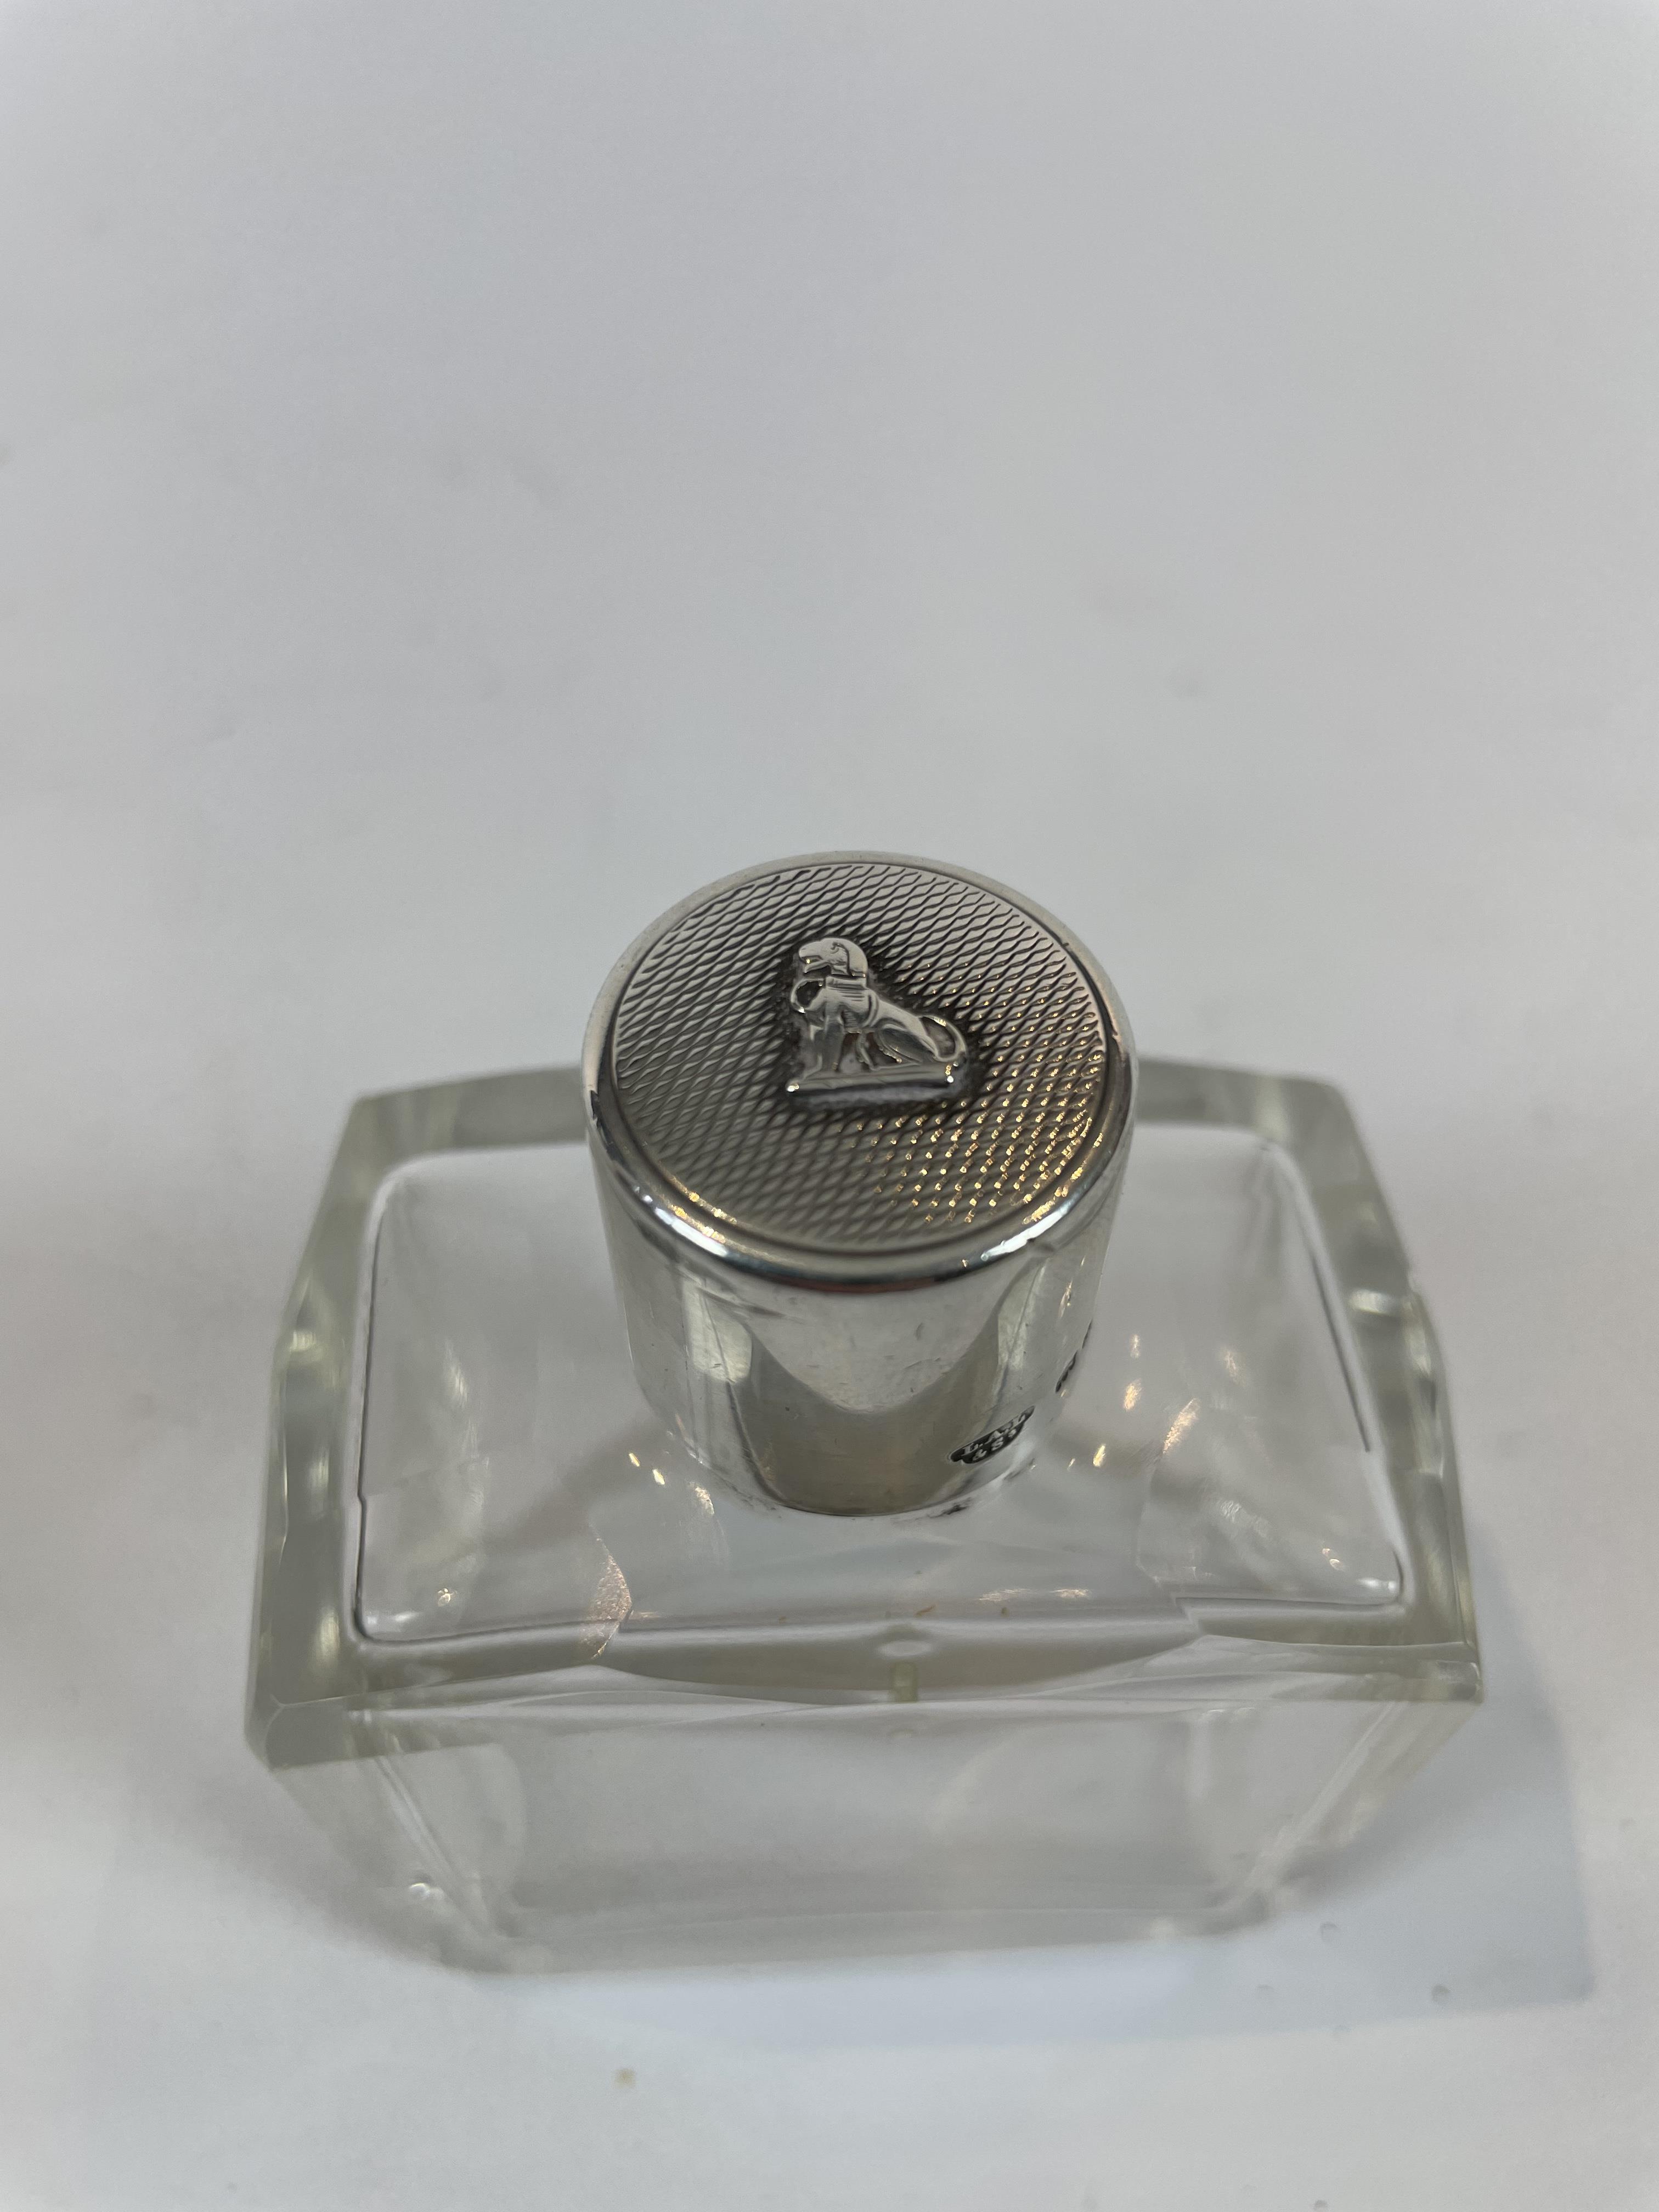 Silver topped scent bottle with dog embossed on the top dated 1930 - Image 2 of 2